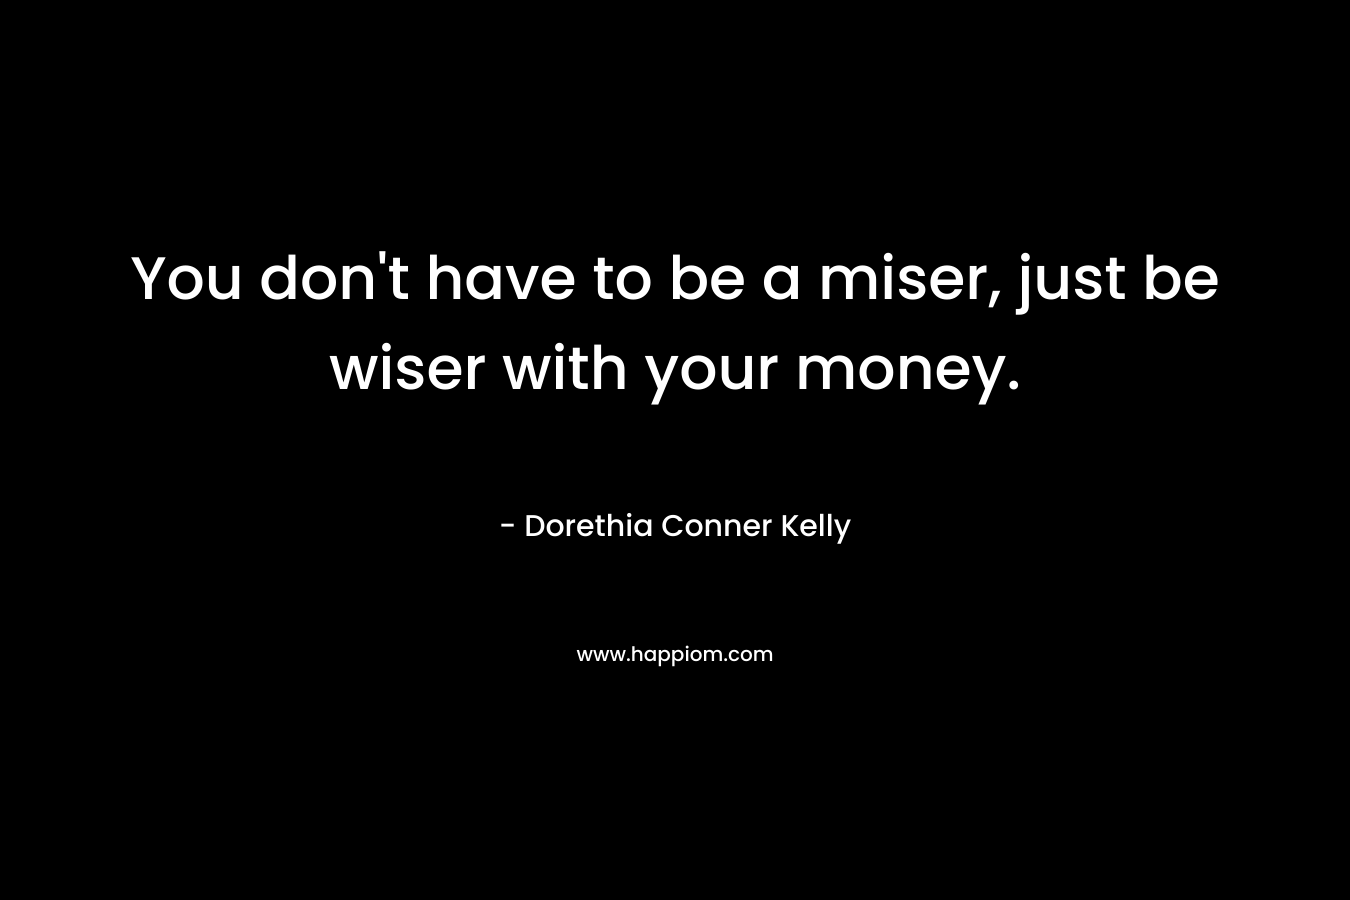 You don't have to be a miser, just be wiser with your money.